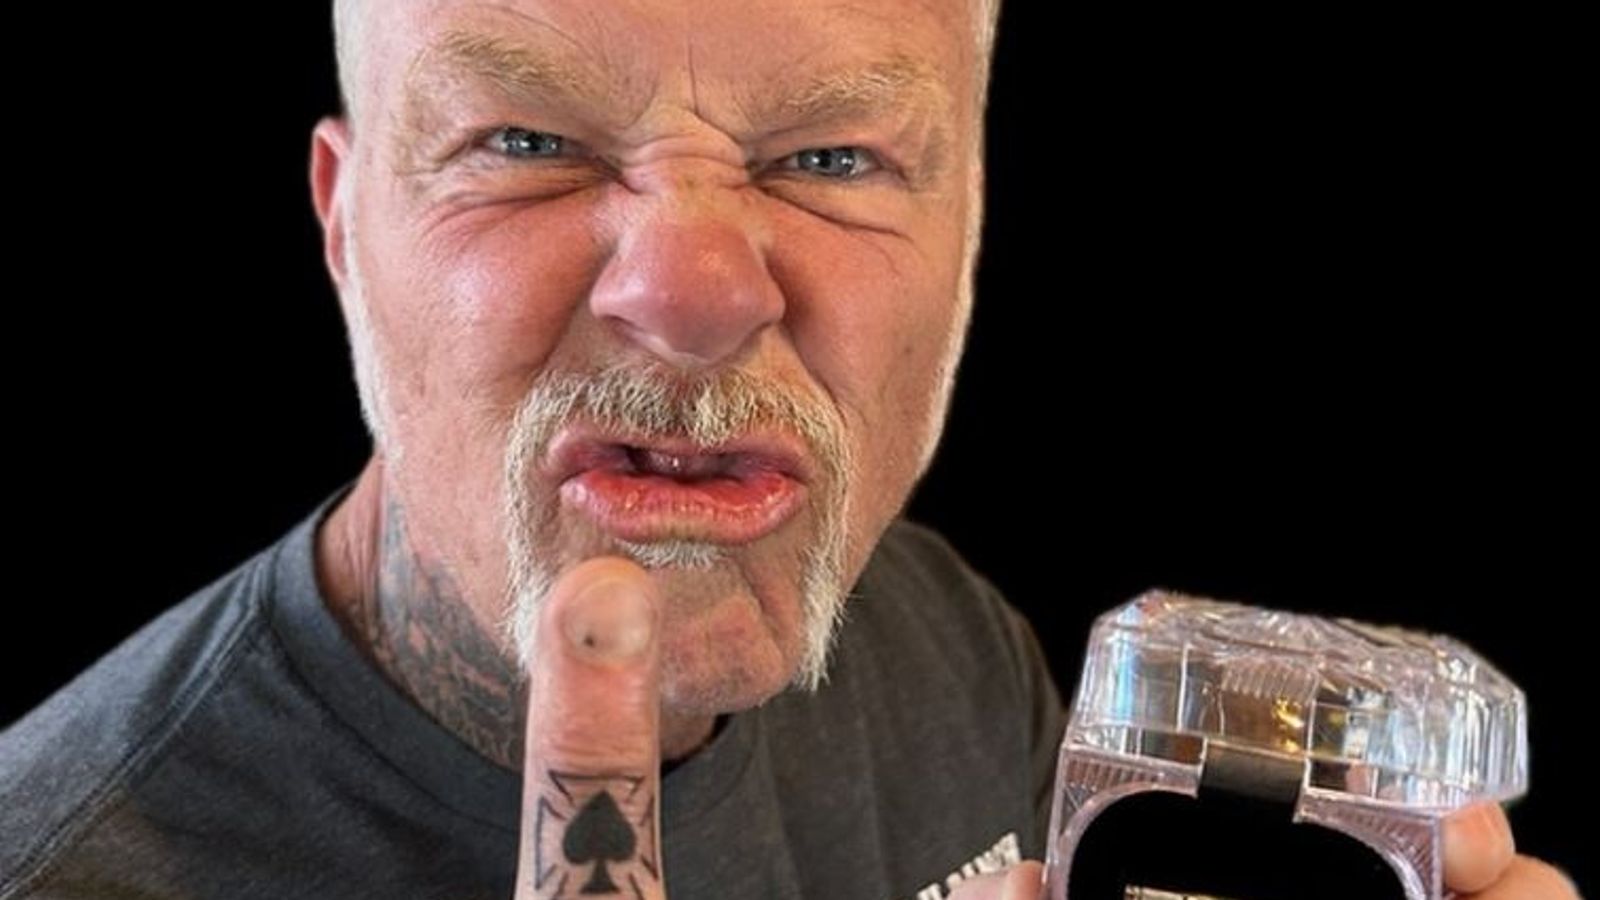 metallica frontman has lemmy's ashes tattooed into finger